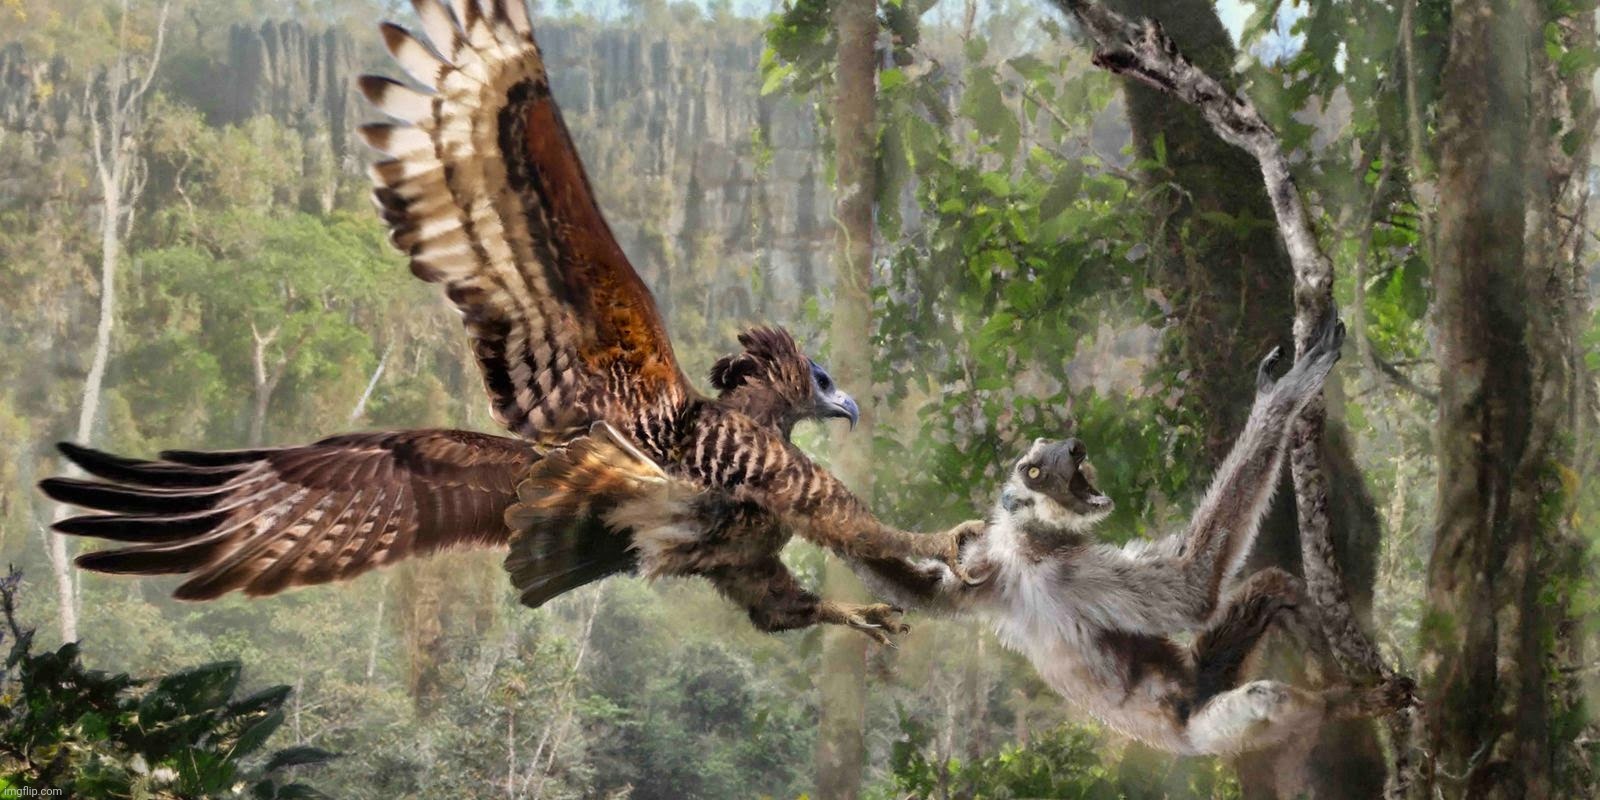 Malagasy crowned eagle (Stephanoaetus mahery) attacking a sloth lemur (palaeopropithecus spp) | image tagged in malagasy crowned eagle,stephanoaetus mahery,sloth lemur,palaeopropithecus spp | made w/ Imgflip meme maker